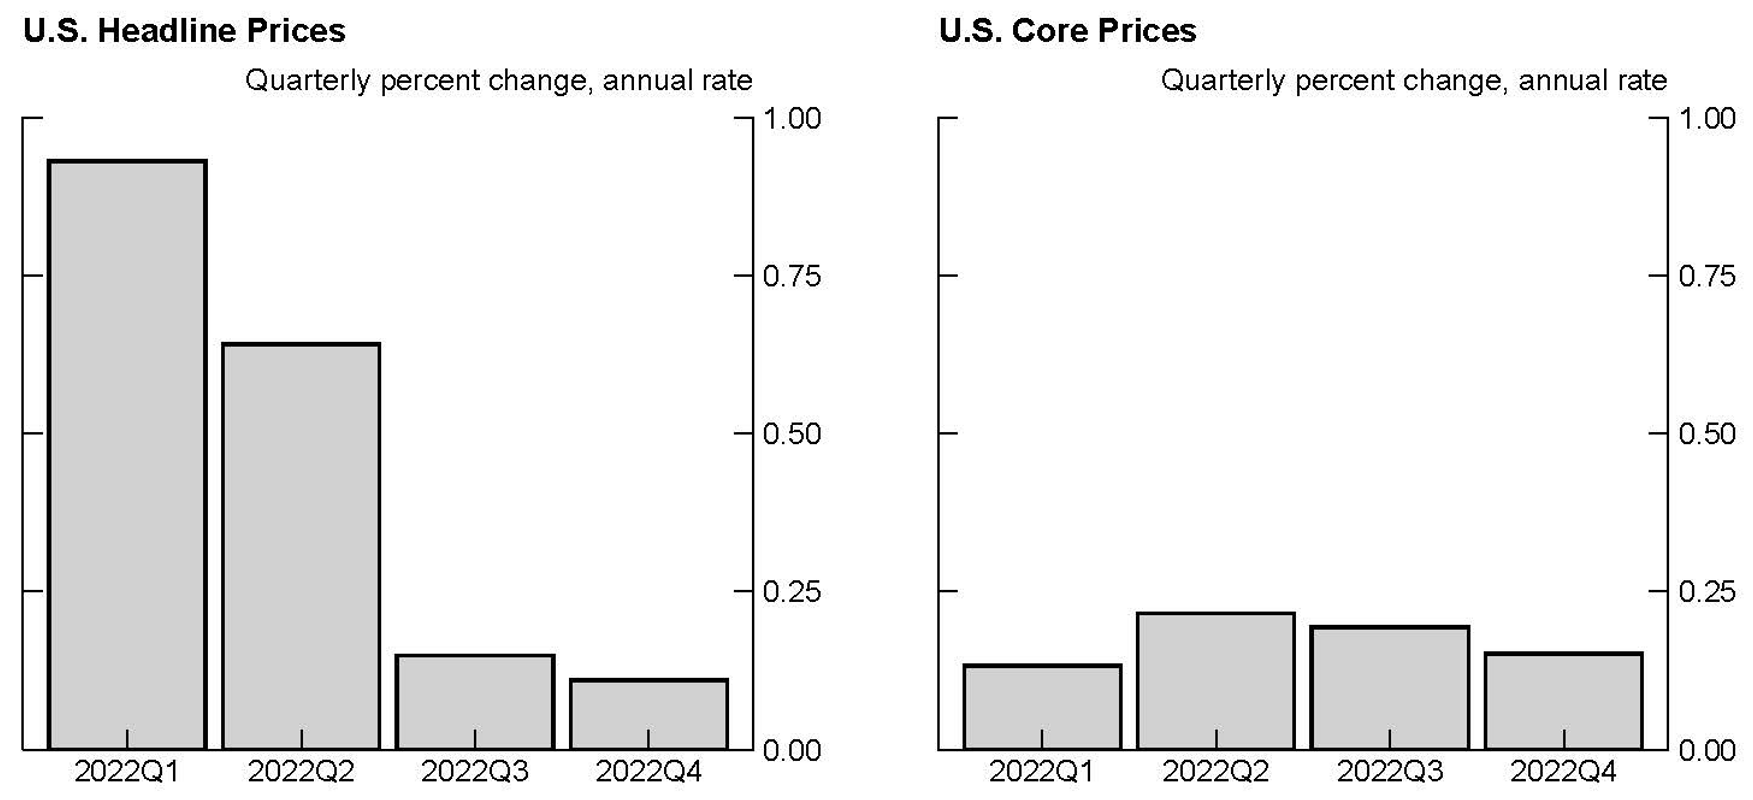 Figure 4. Effects of 2022H1 Foreign Oil Shock on US Inflation. See accessible link for data.